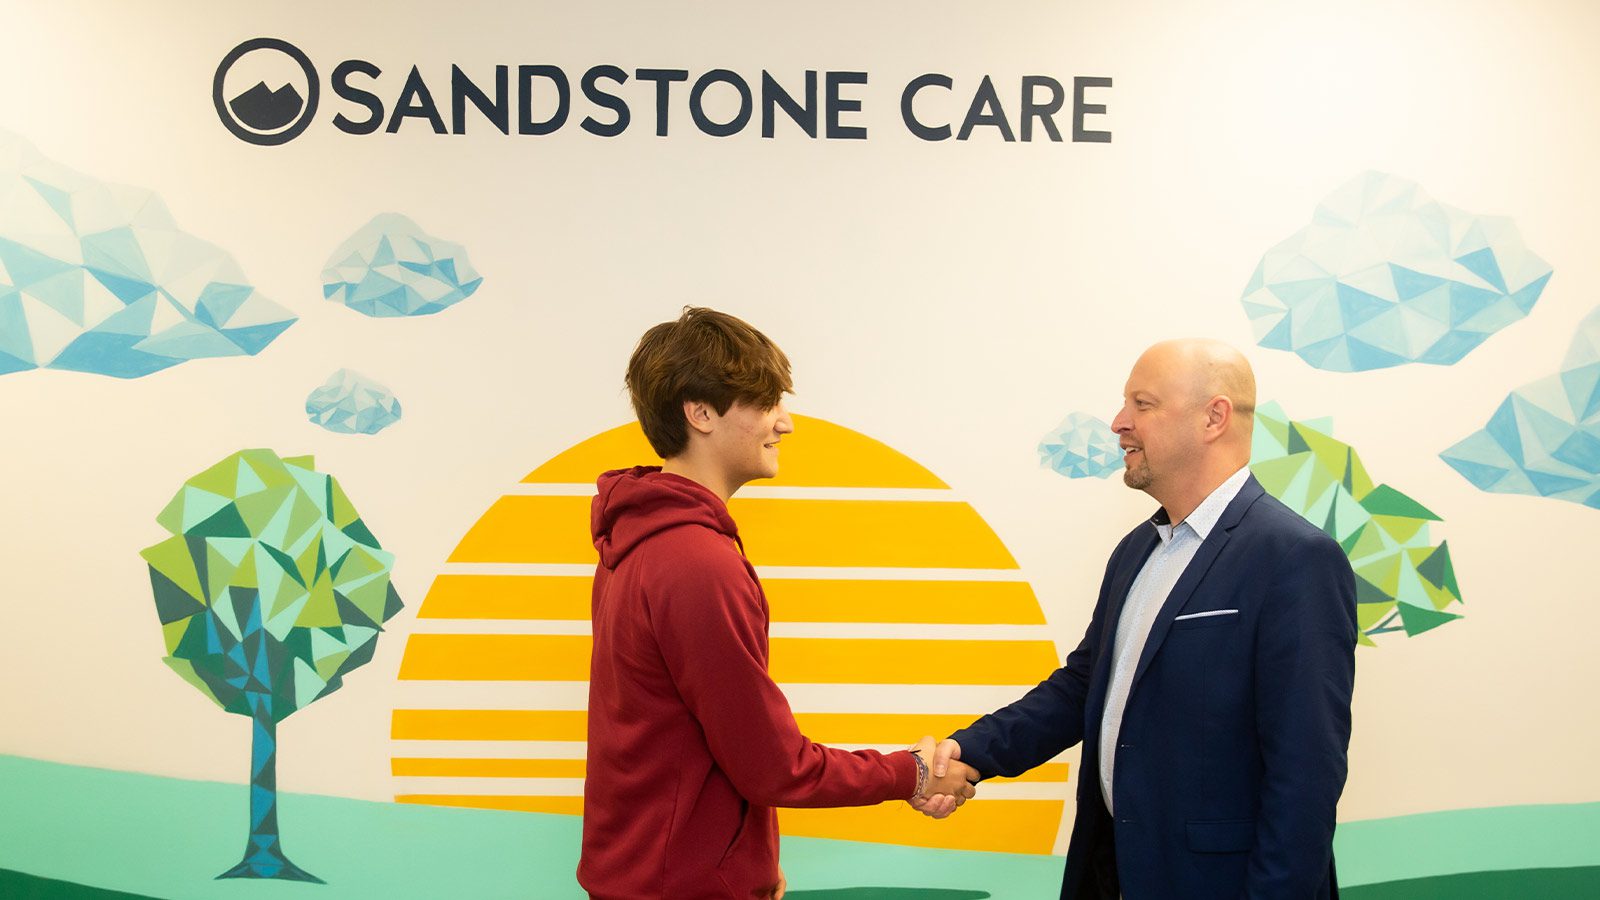 A teenager and man shaking hands in front of a mural with the logo "Sandstone Care."